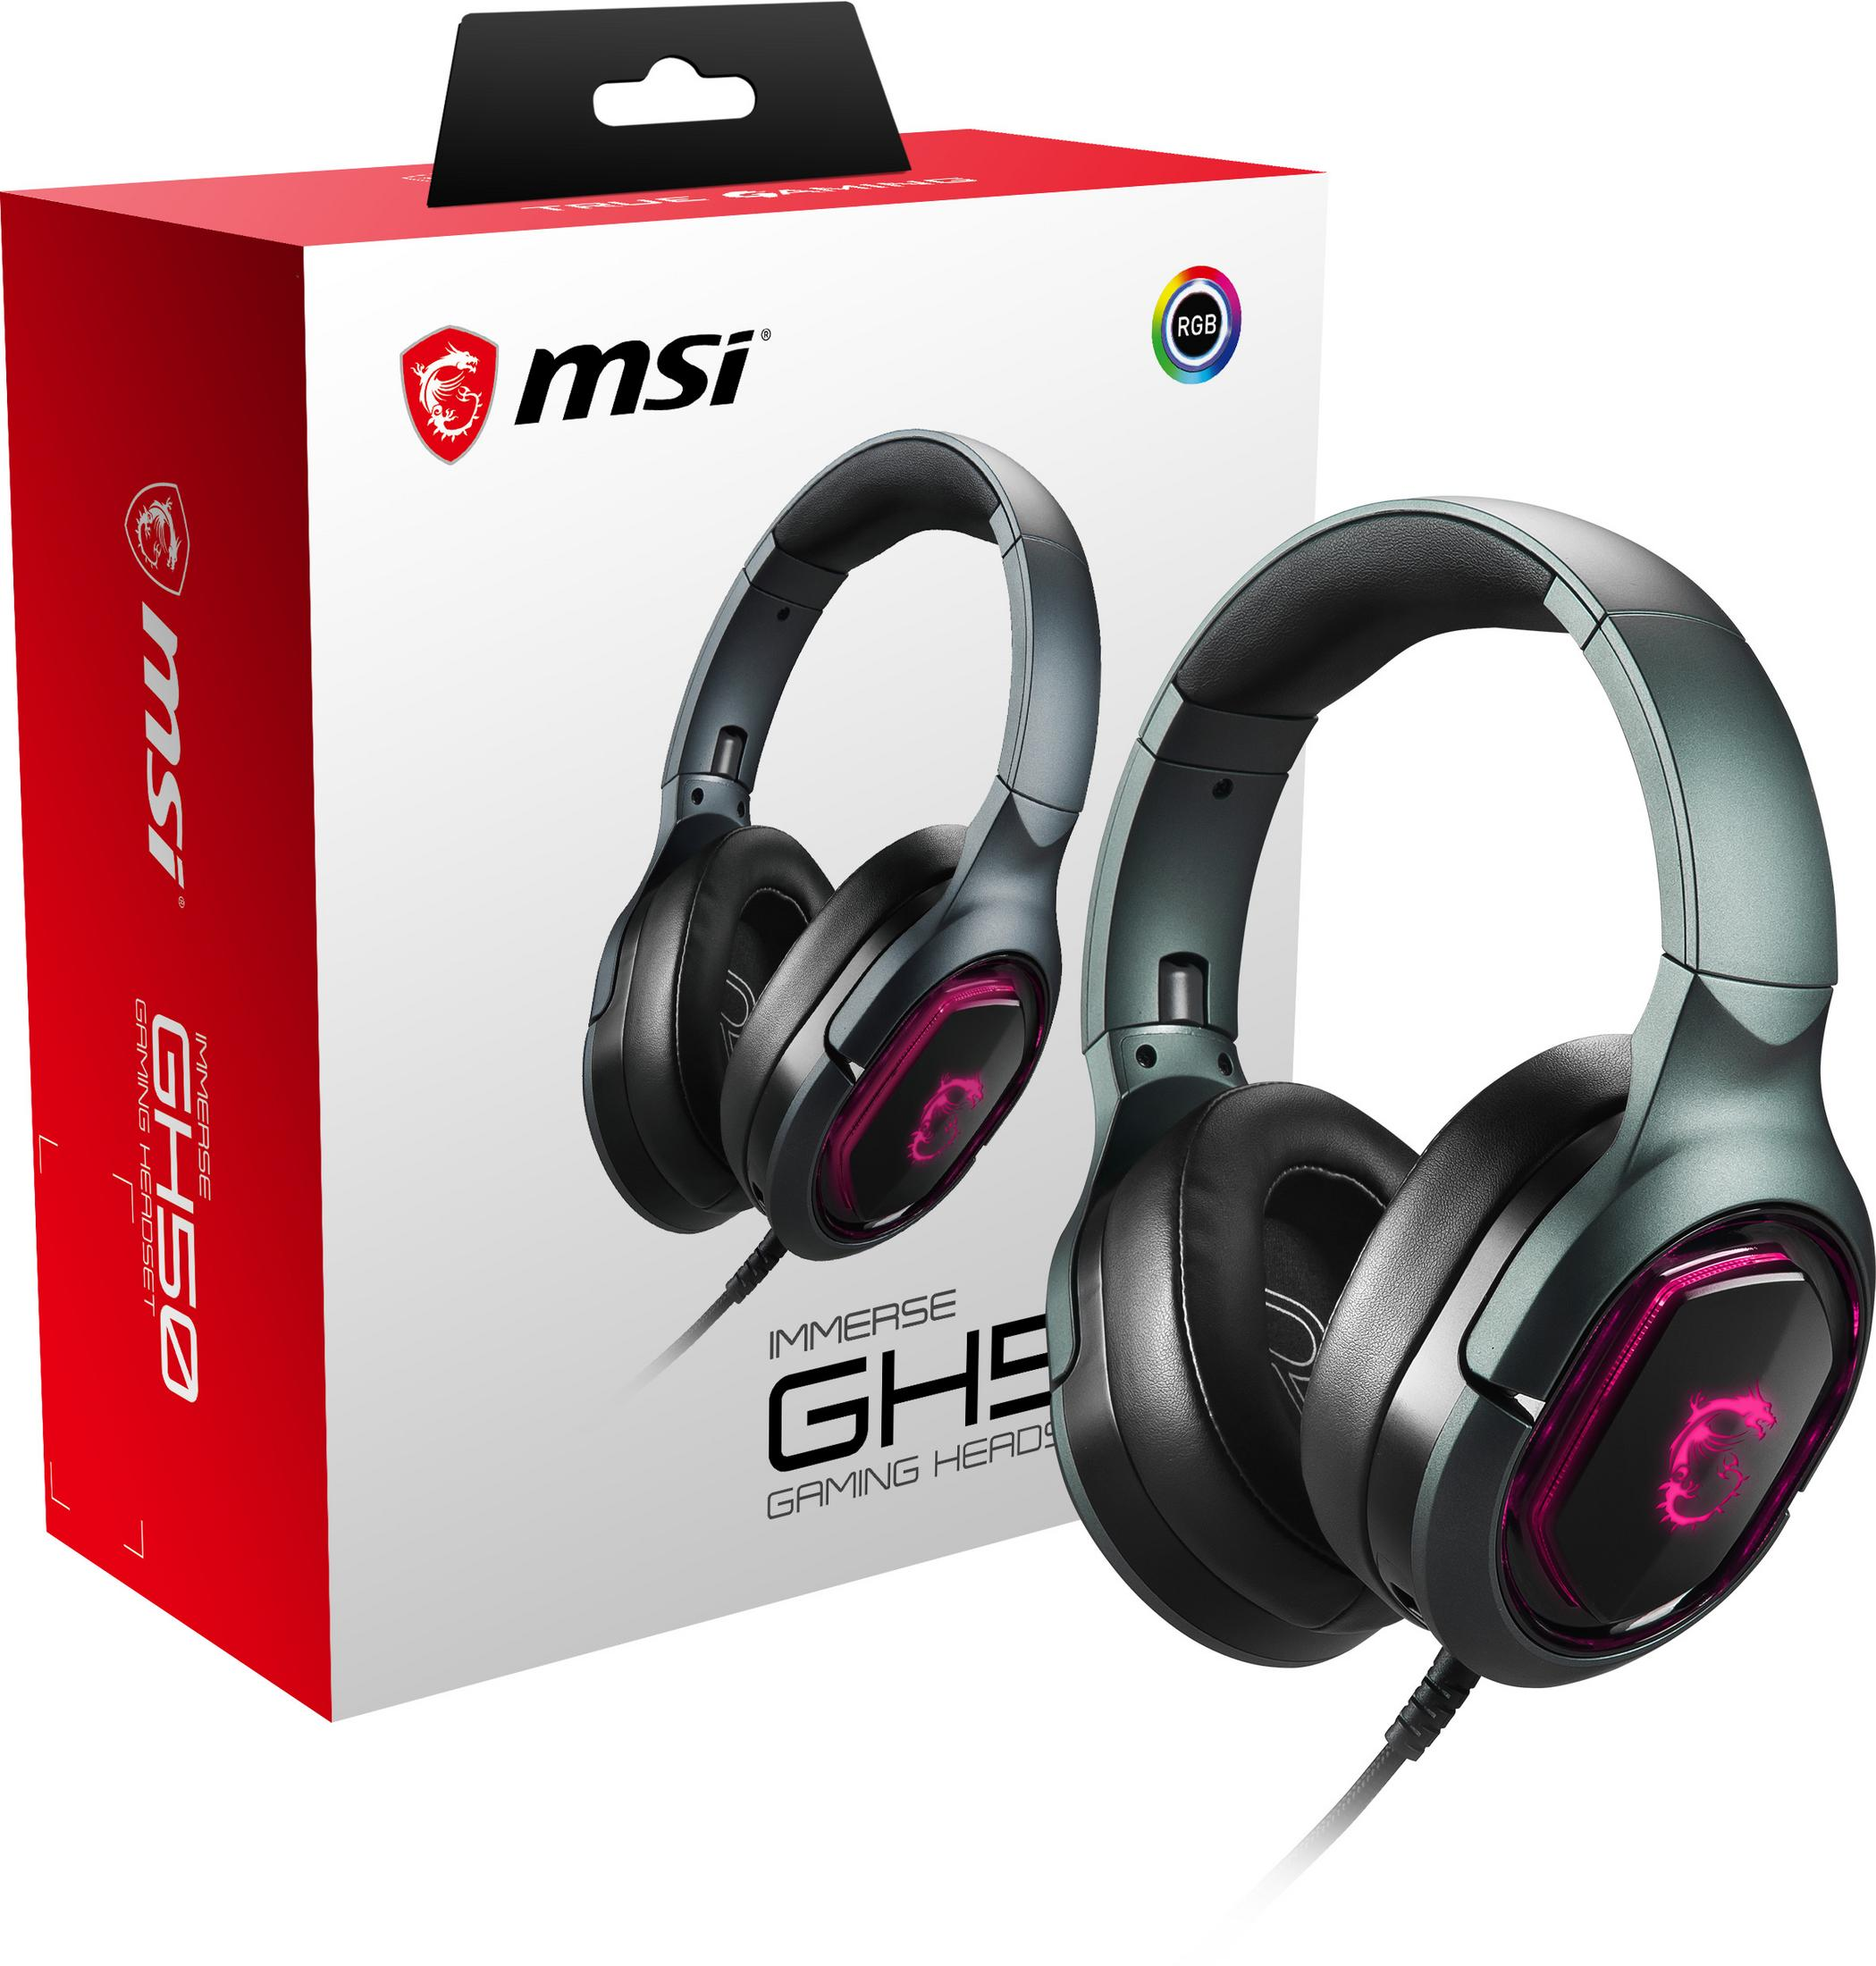 GAMING S37-0400020-SV1 Headset Over-ear Schwarz IMMERSE GH50 HEADSET, MSI Gaming